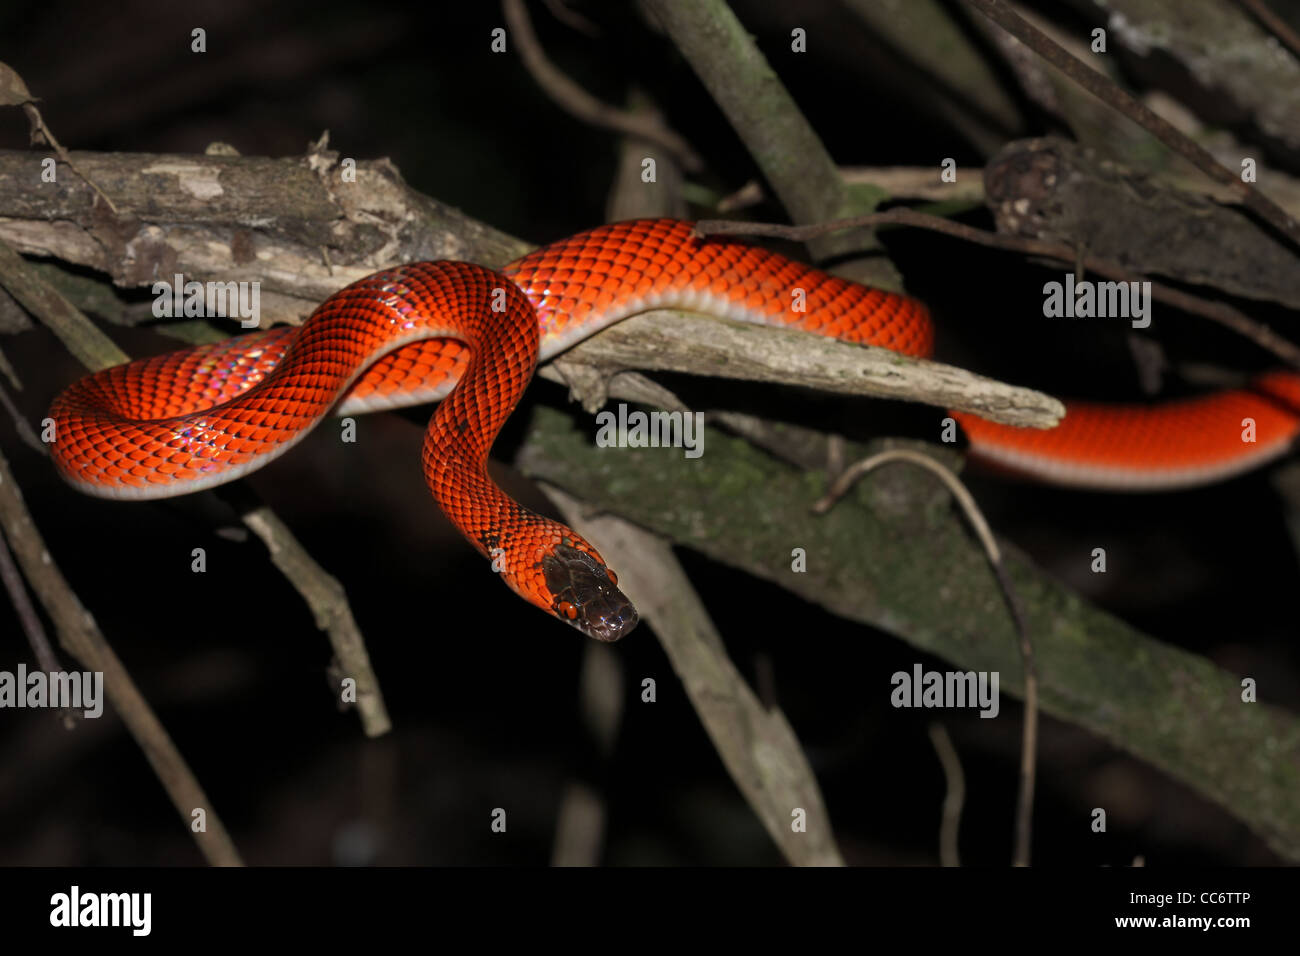 A Vibrant False Coral Snake (Oxyrhopus sp.) in the Peruvian Amazon Stock Photo